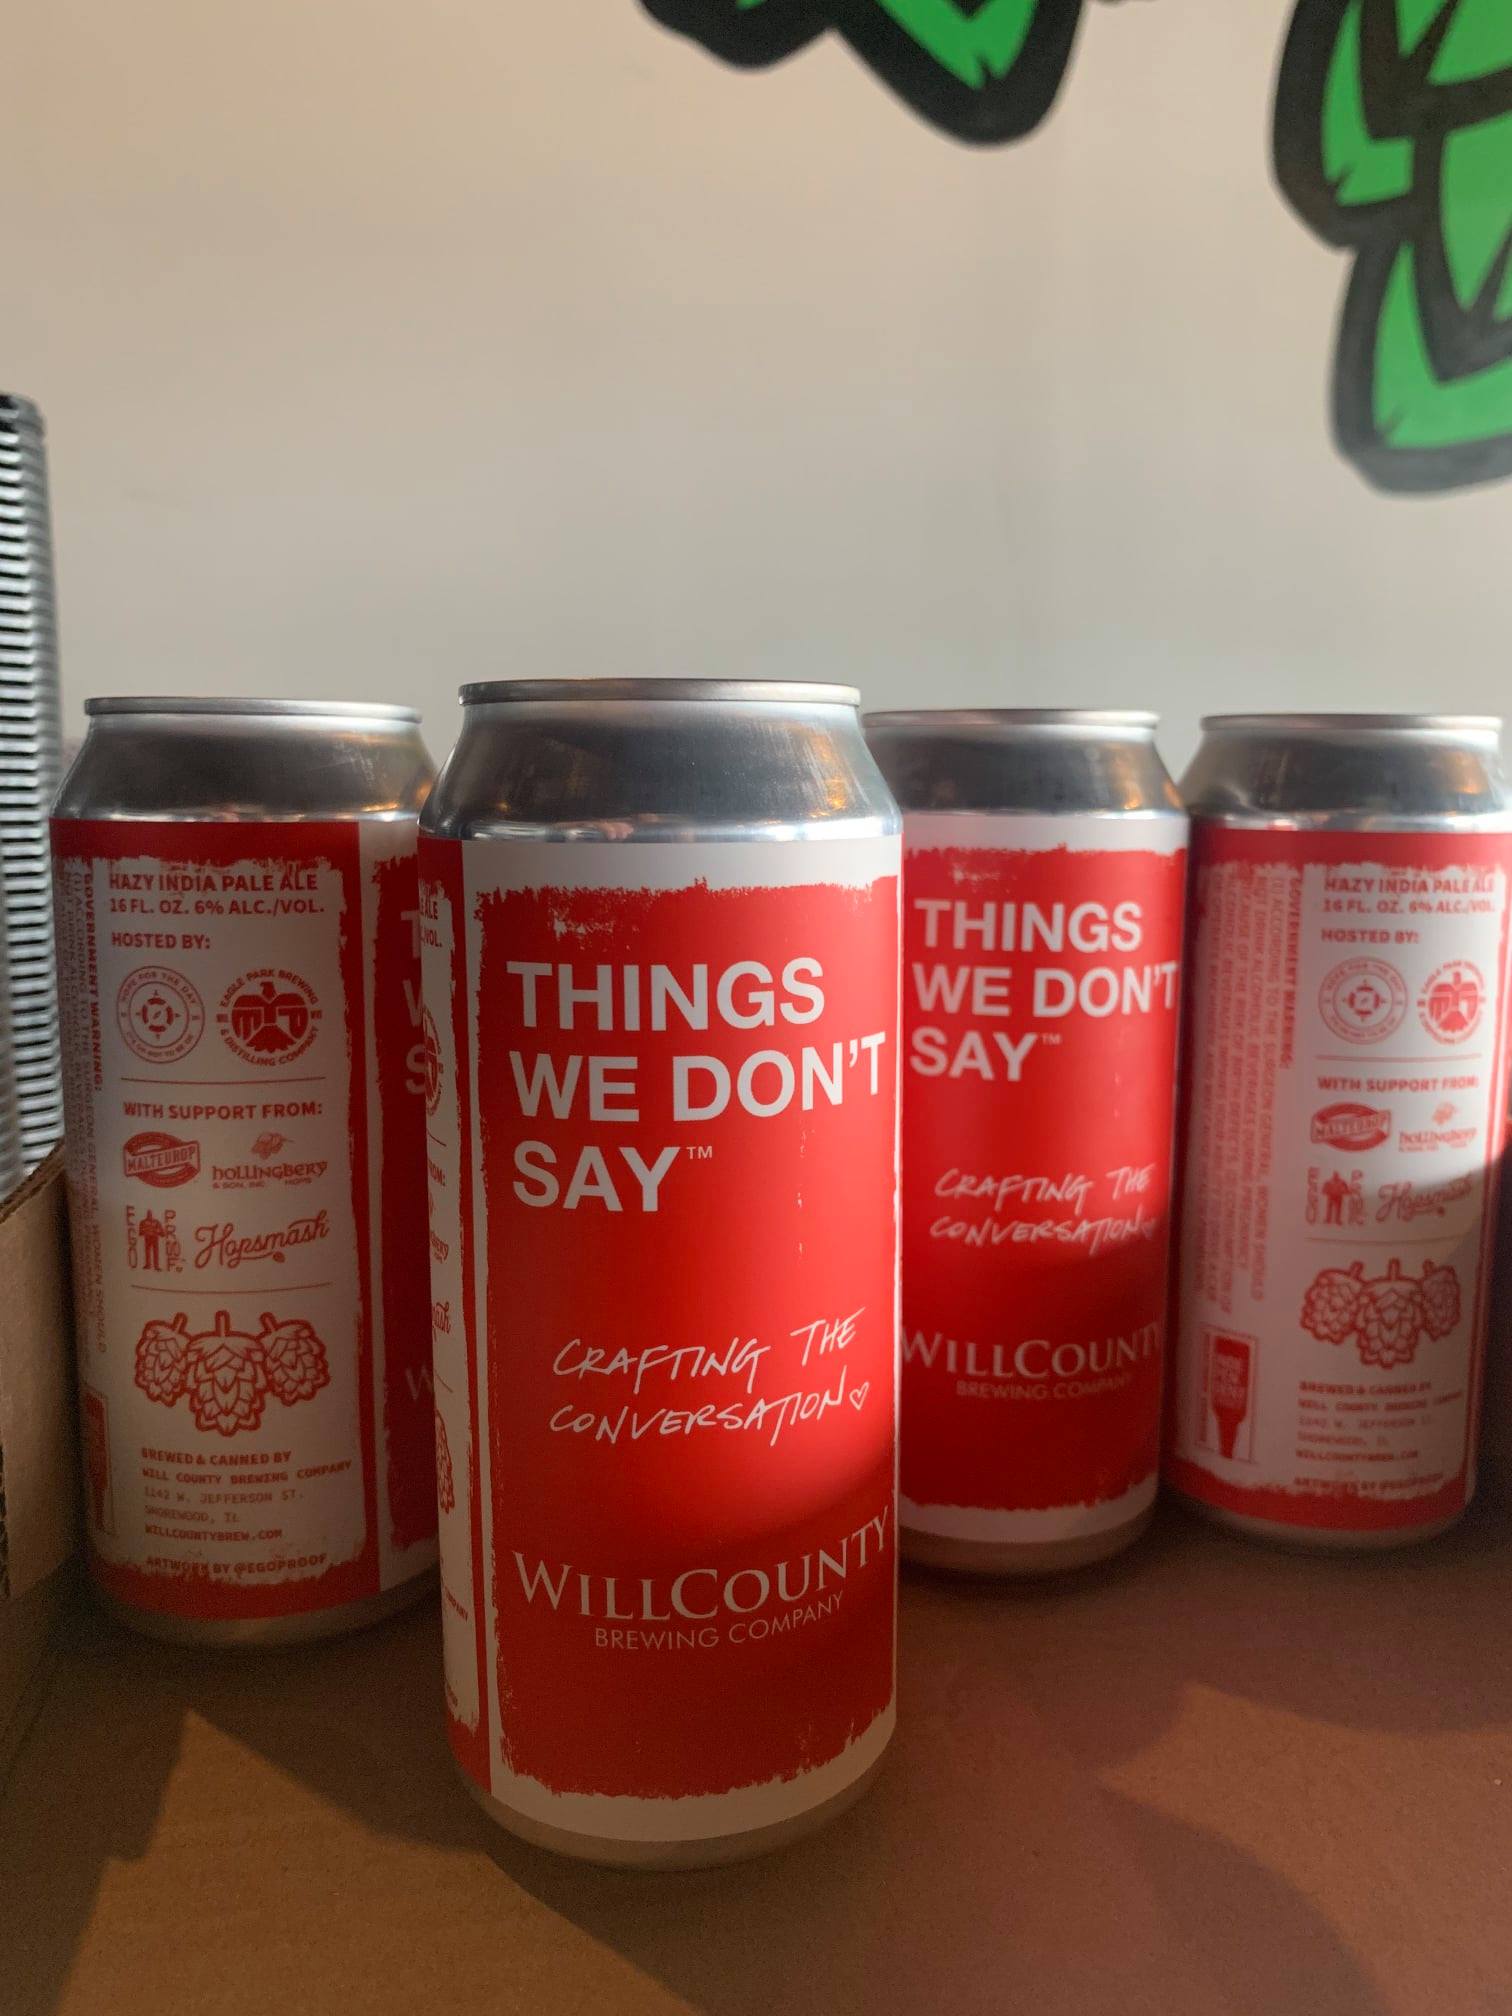 Cans of Thigns We Dont' Say at Will County Brewing  COmpany